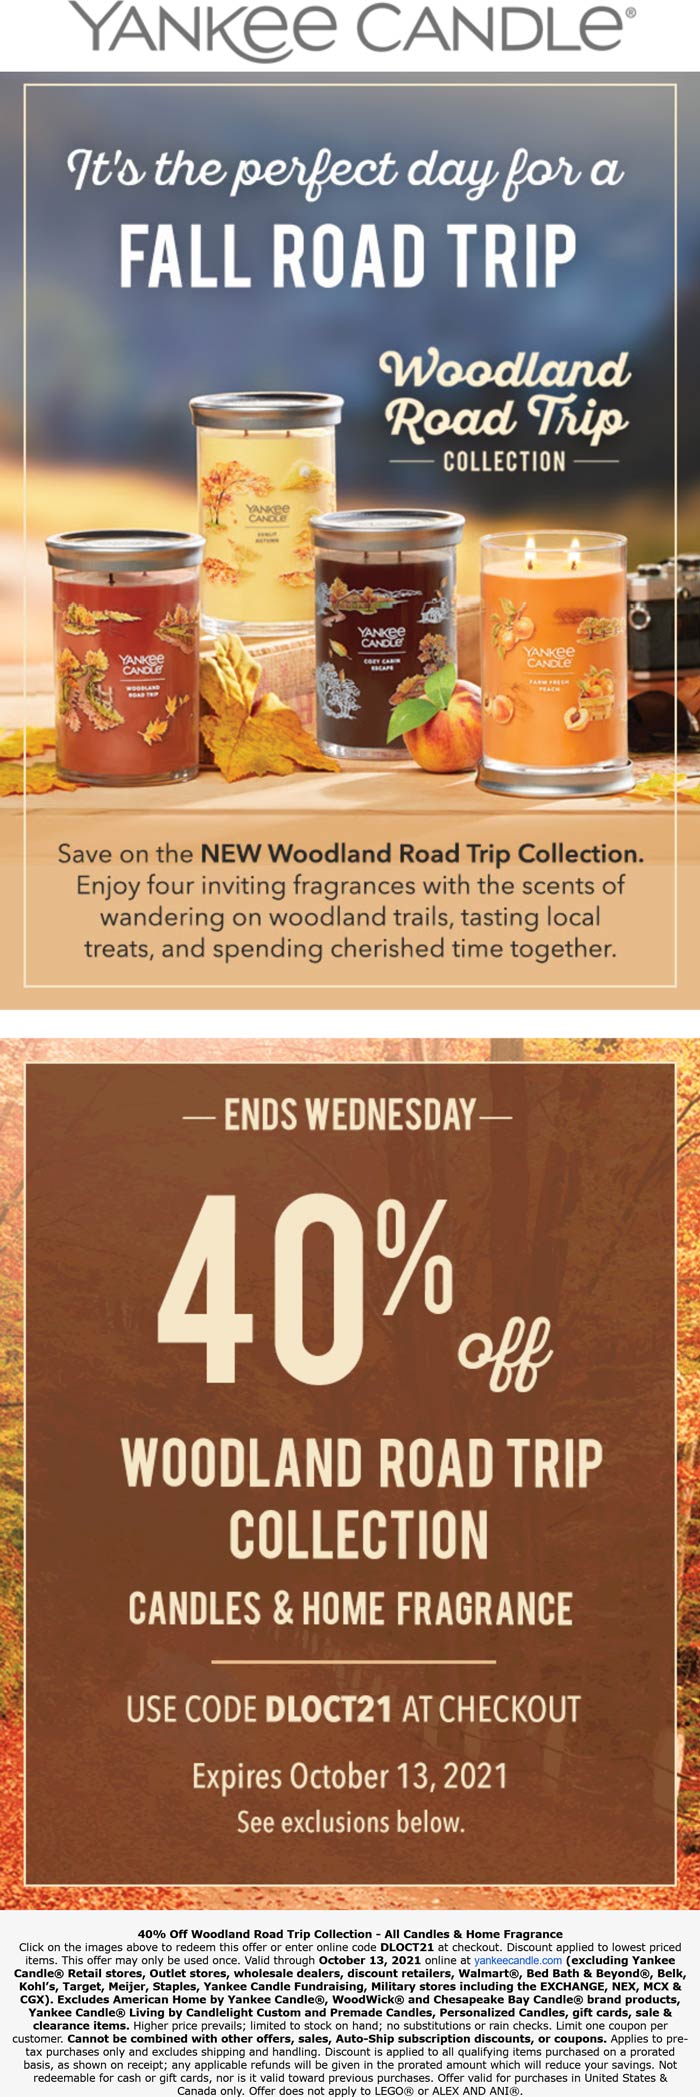 Yankee Candle stores Coupon  40% off road trip collection at Yankee Candle, or online via promo code DLOCT21 #yankeecandle 